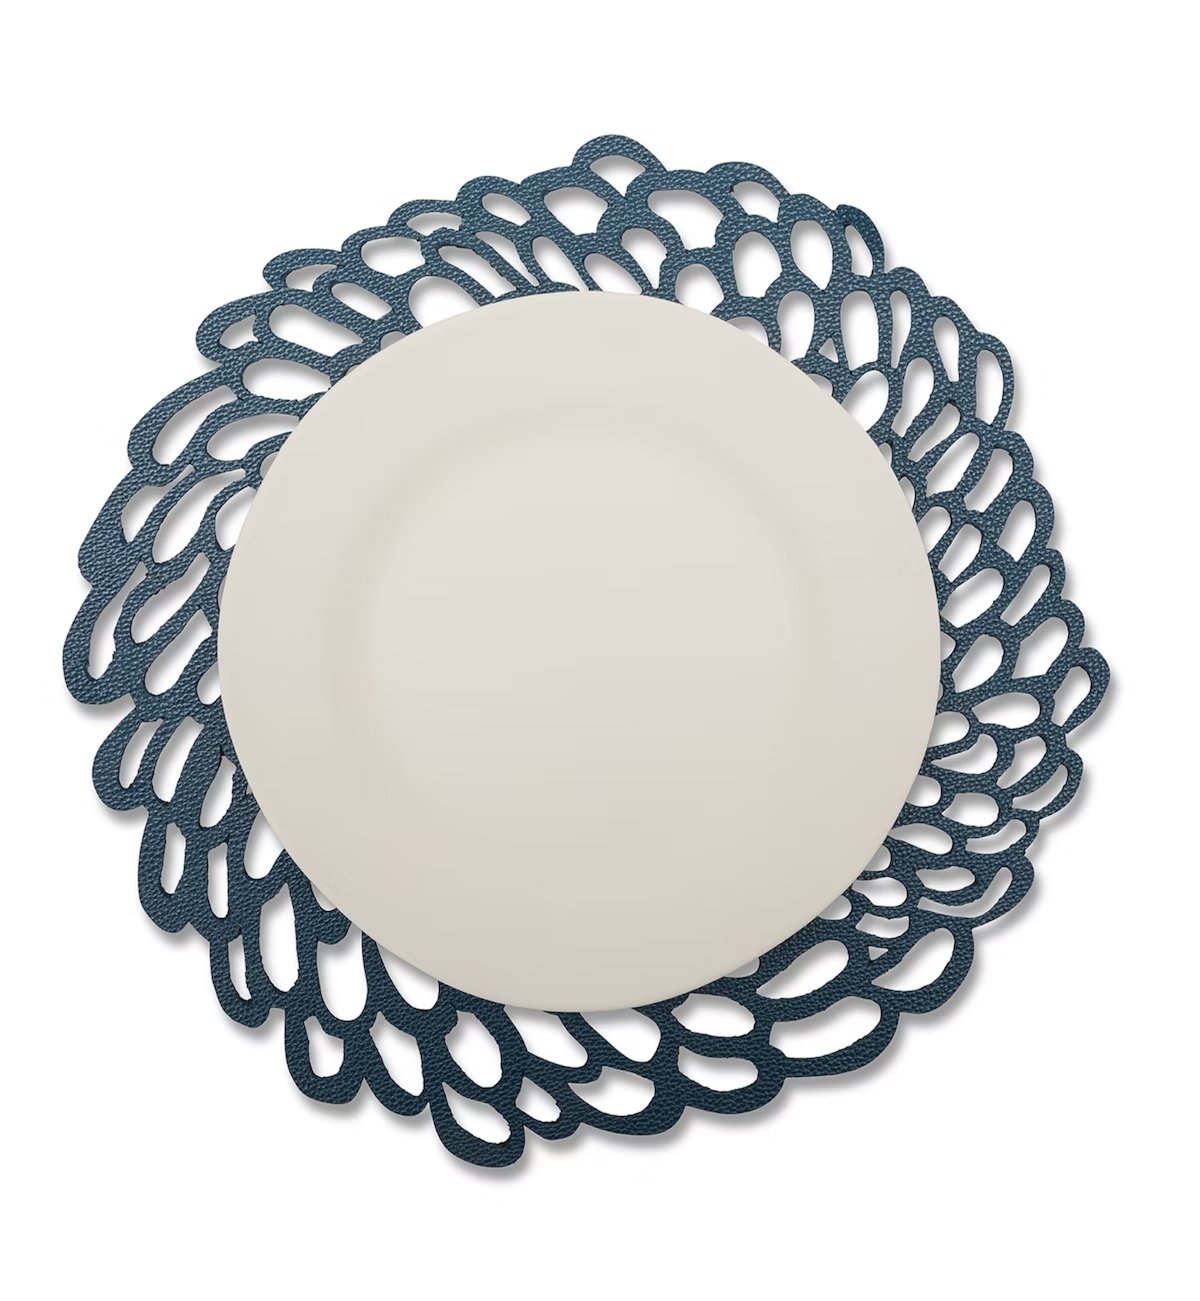 A lace effect washable paper circular placemat is shown in navy, under a white plate.